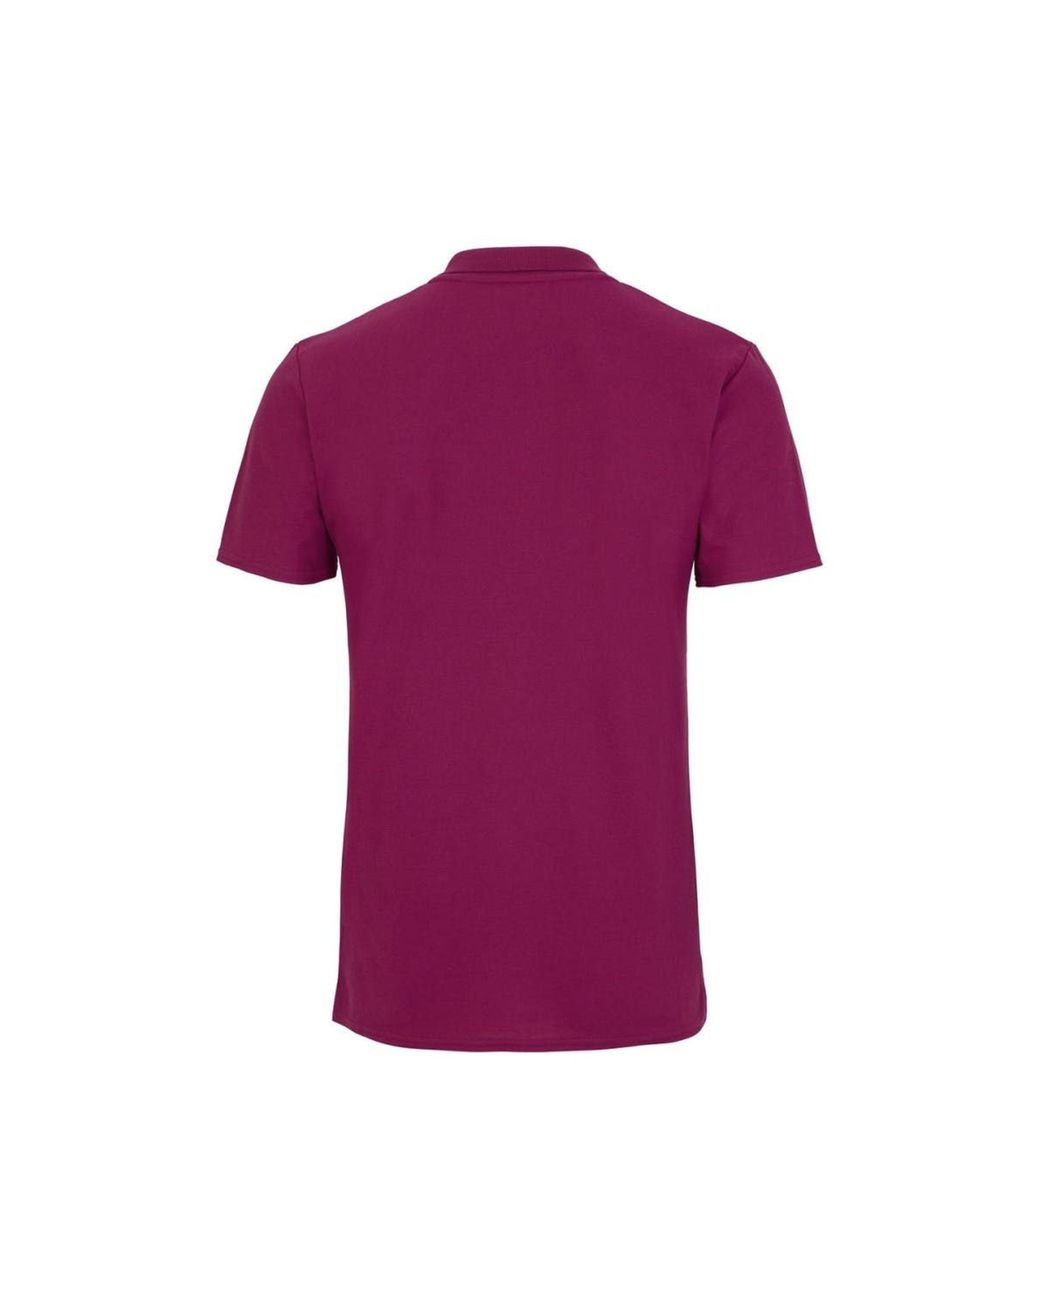 Umbro West Ham United Fc 22/23 Polo Shirt in Purple for Men | Lyst